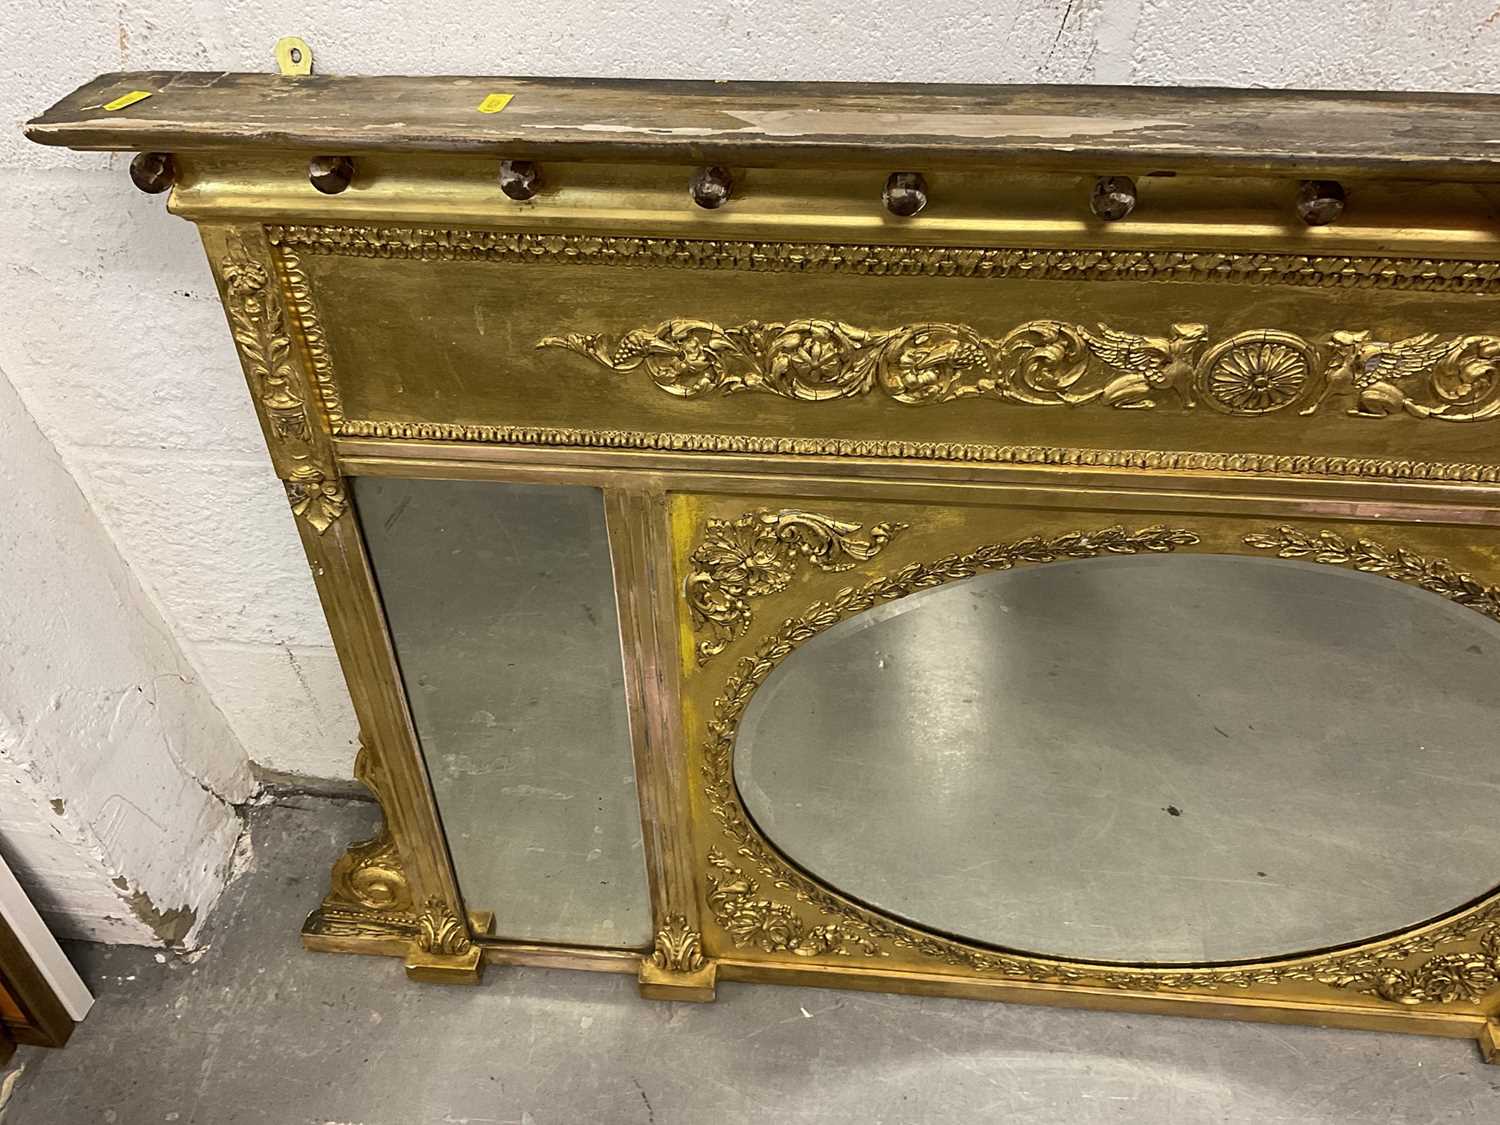 Early 19th century overmantel mirror in gilt frame - Image 2 of 6